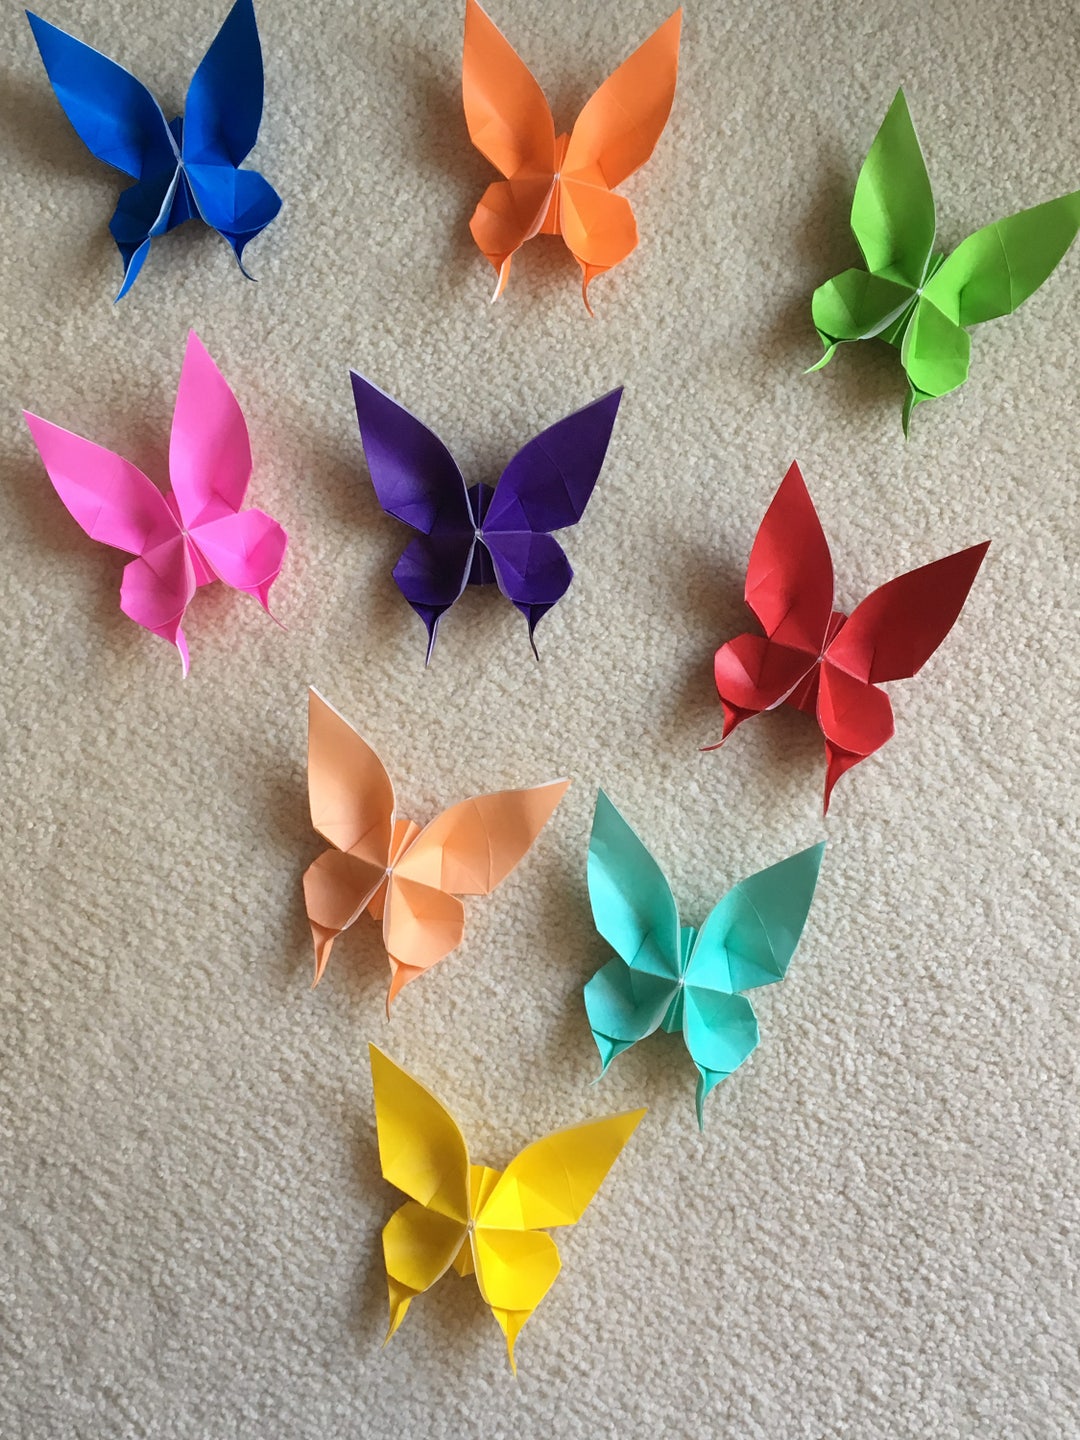 The 2 Minute Origami Butterfly To Make Right Now! - creative jewish mom